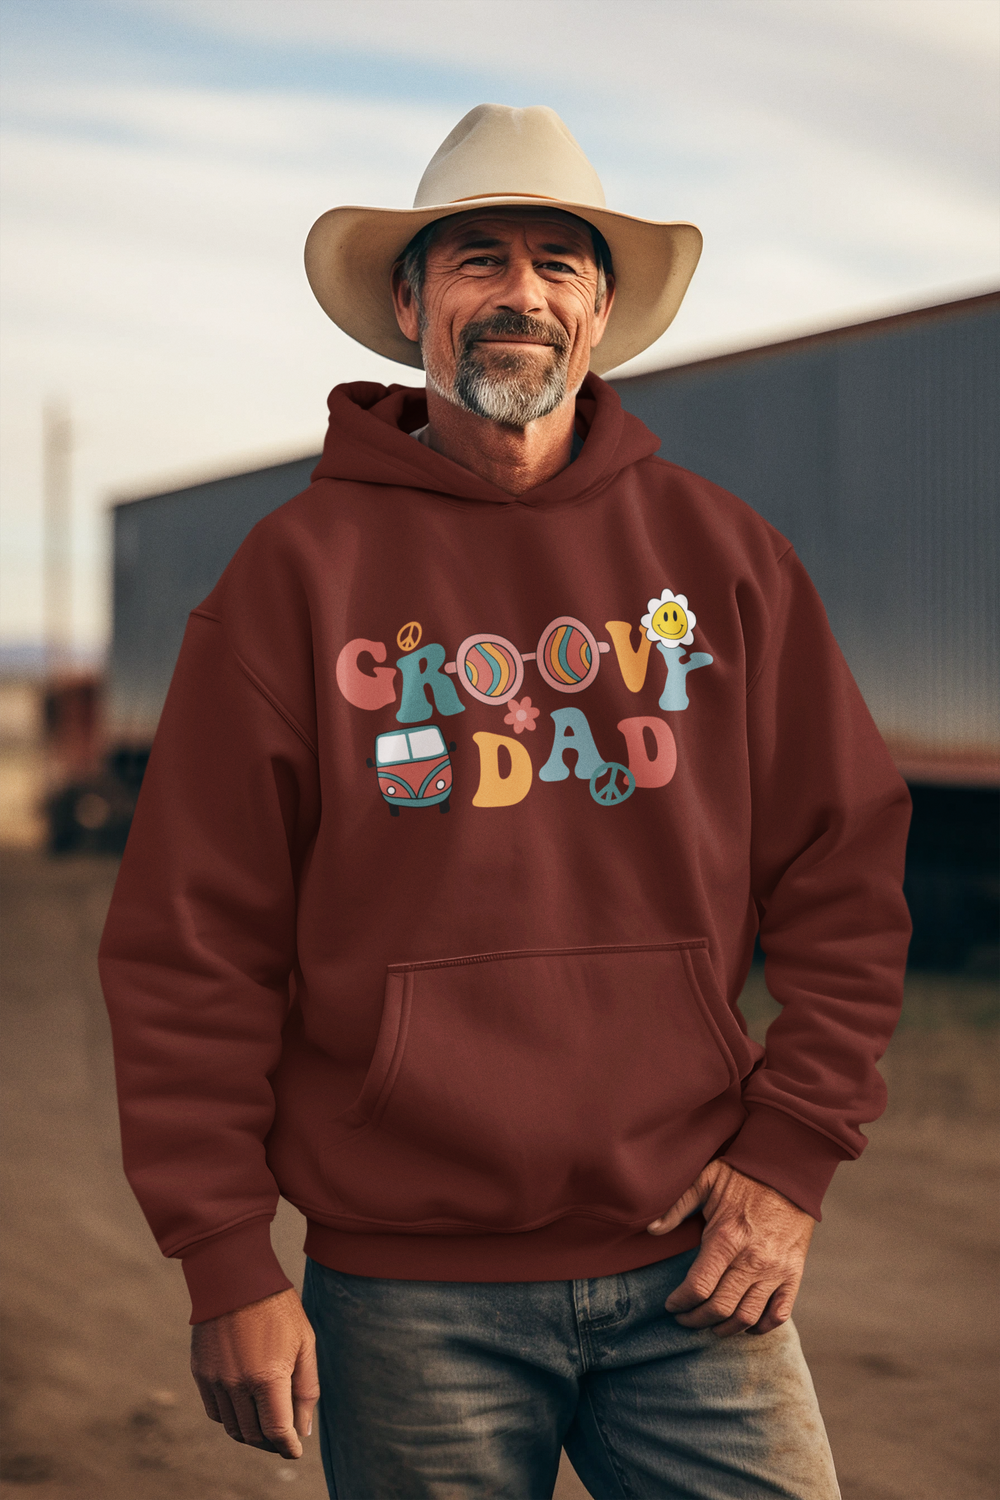 Groovy Dad: Groovy Dad - DTF Transfer - Direct-to-Film